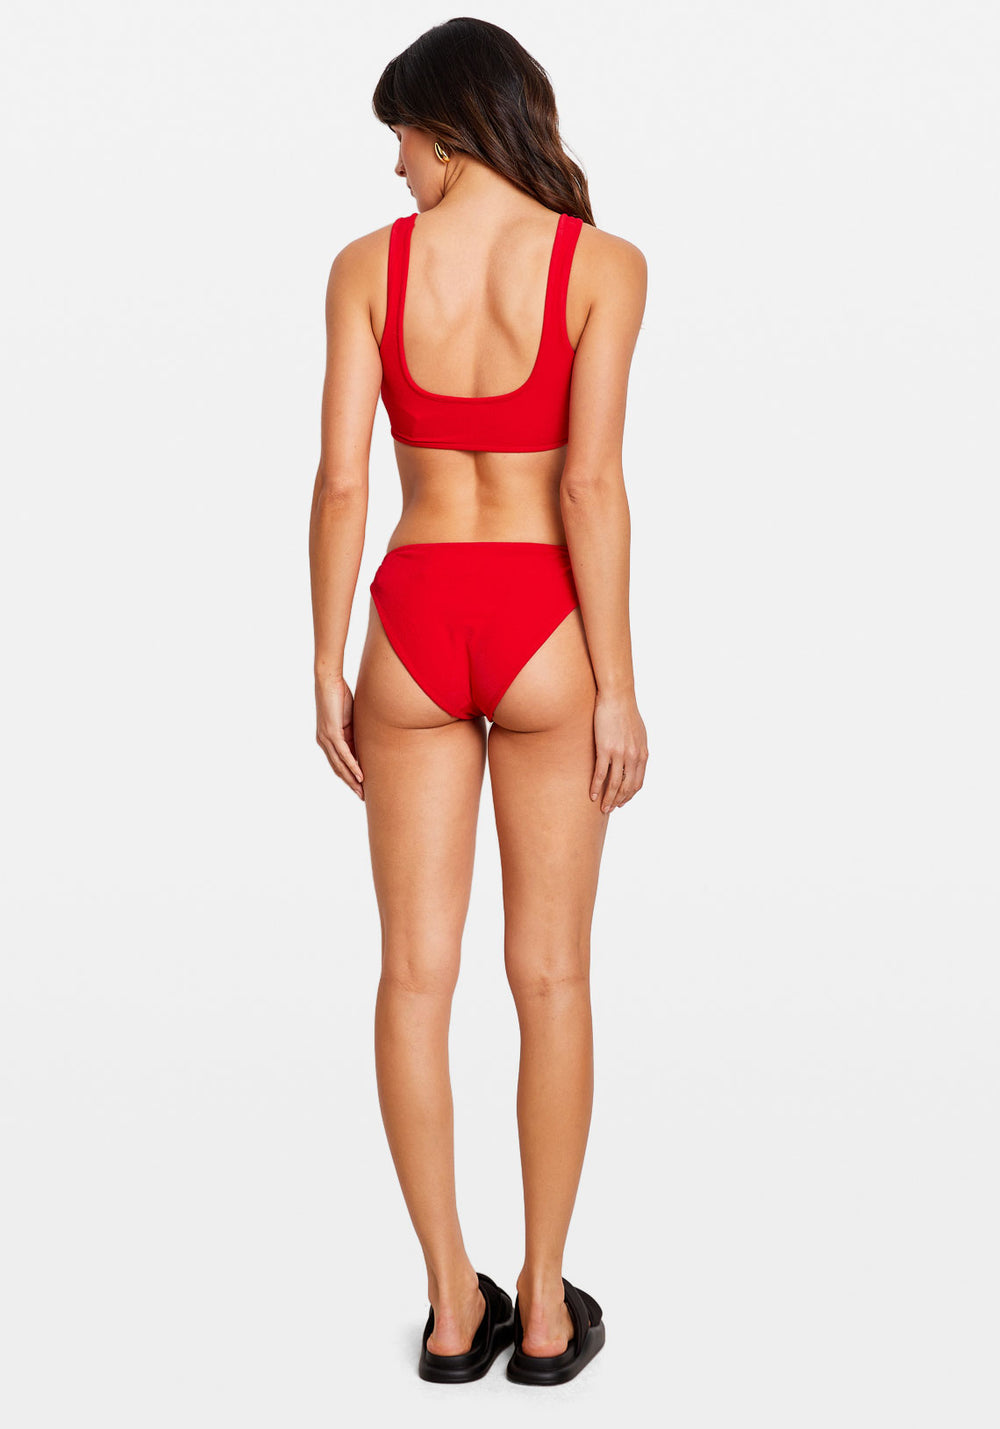 TERRY BRIEF REVERSIBLE RED/BALLERINA PINK